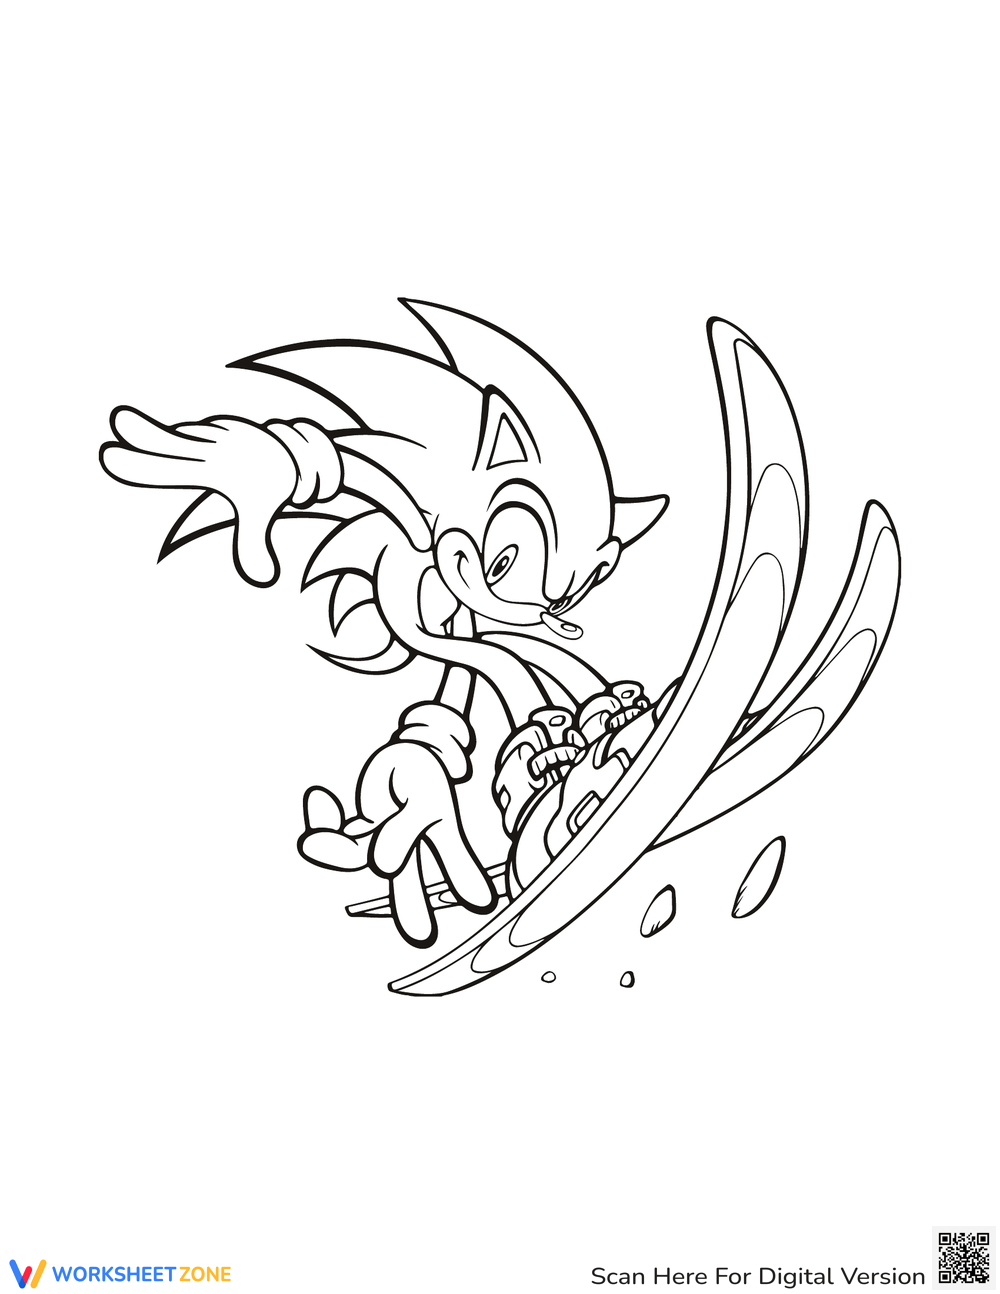 Grade sonic coloring pages worksheets